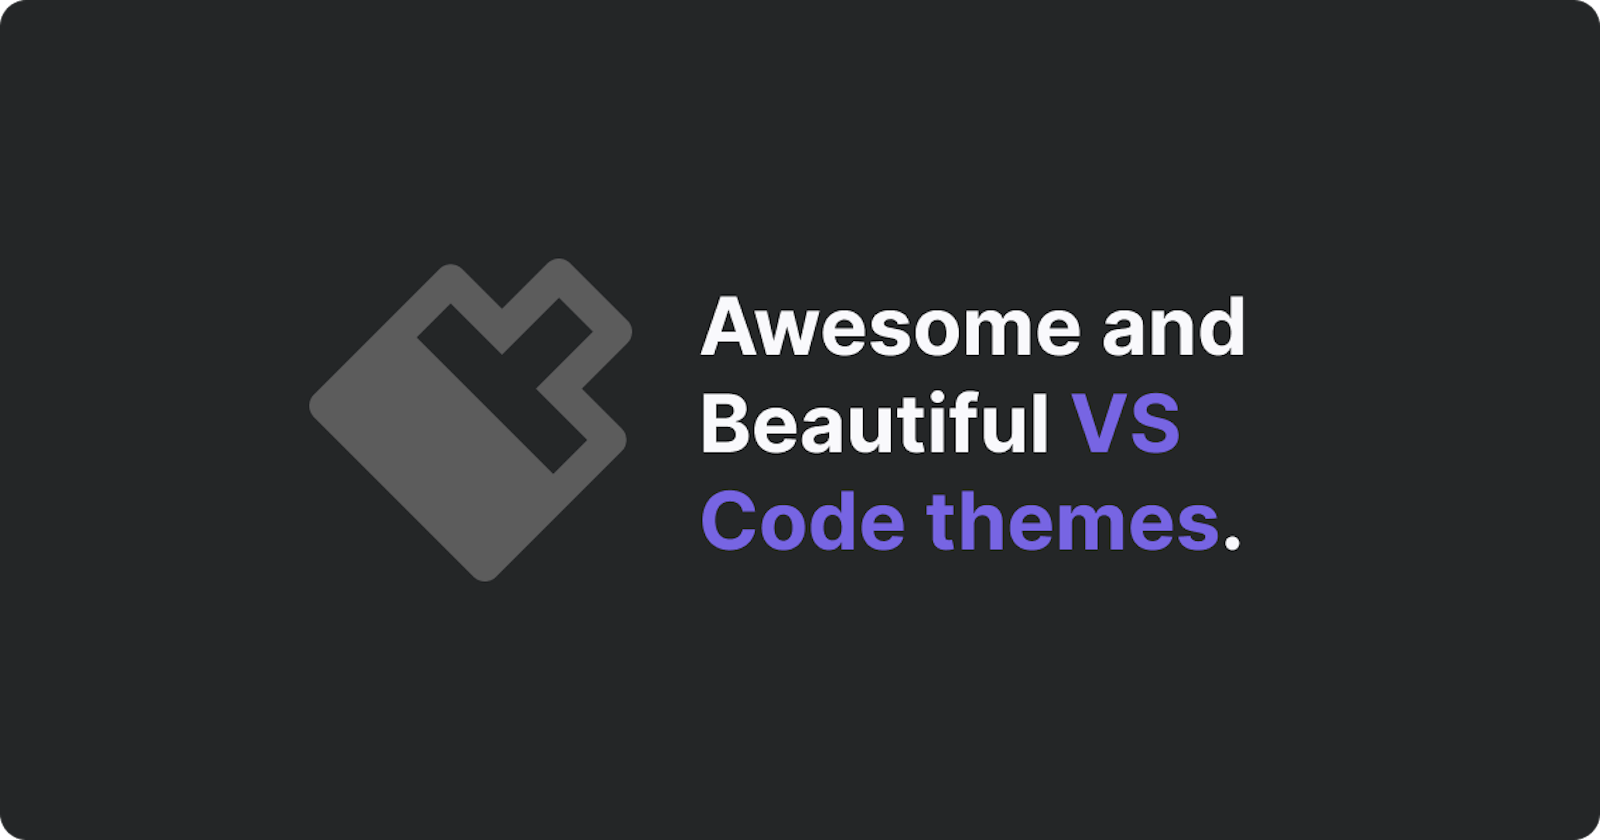 Awesome and Beautiful VS Code themes